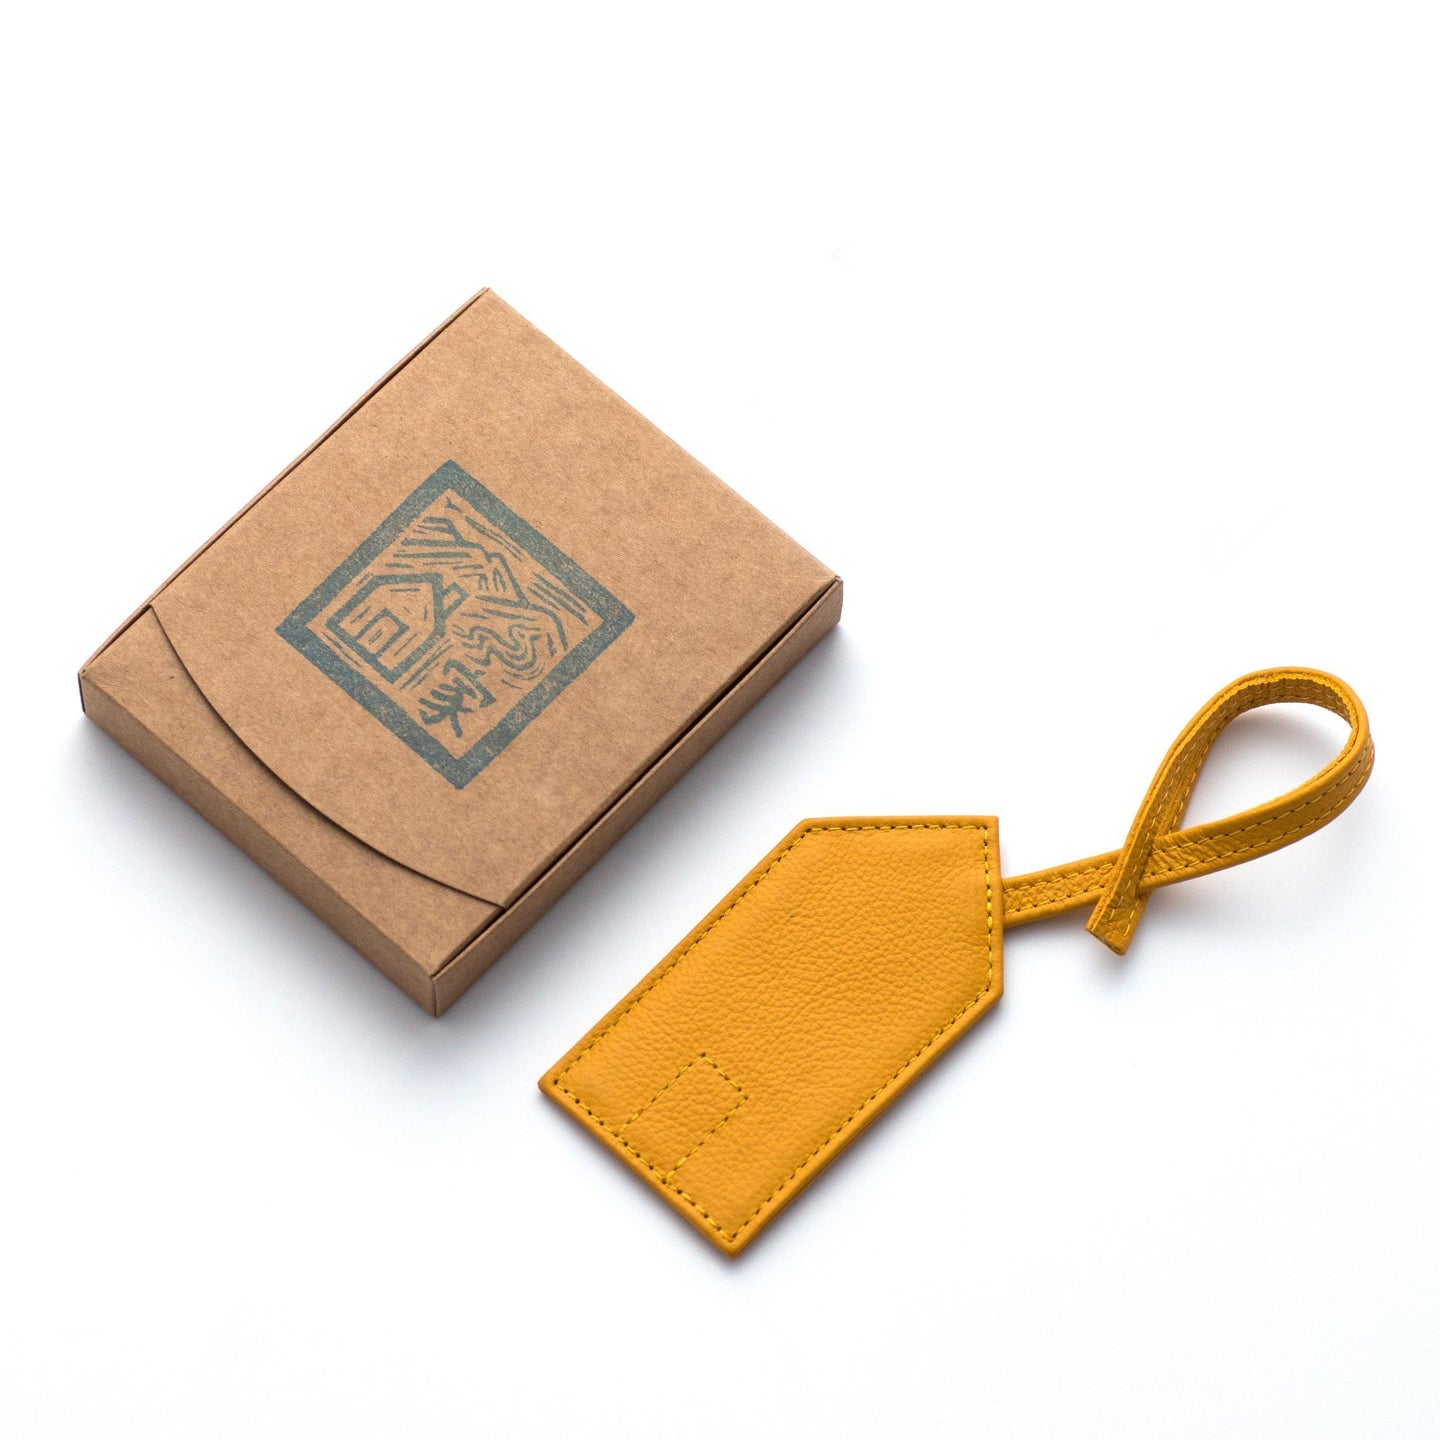 Das Haus Leather Luggage Tag in Gift box